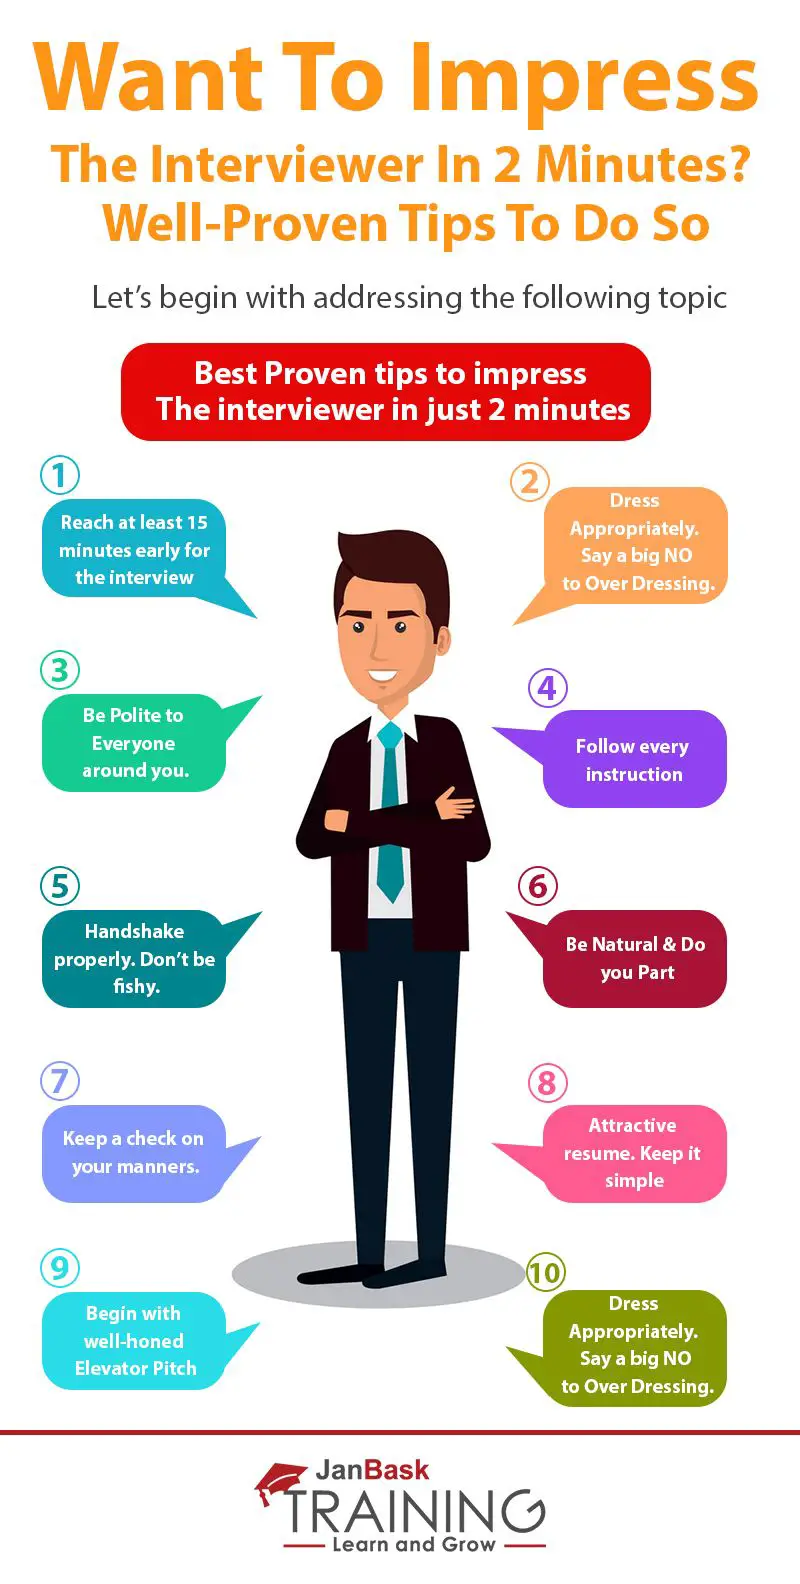 Want To Impress The Interviewer In 2 Minutes? Well